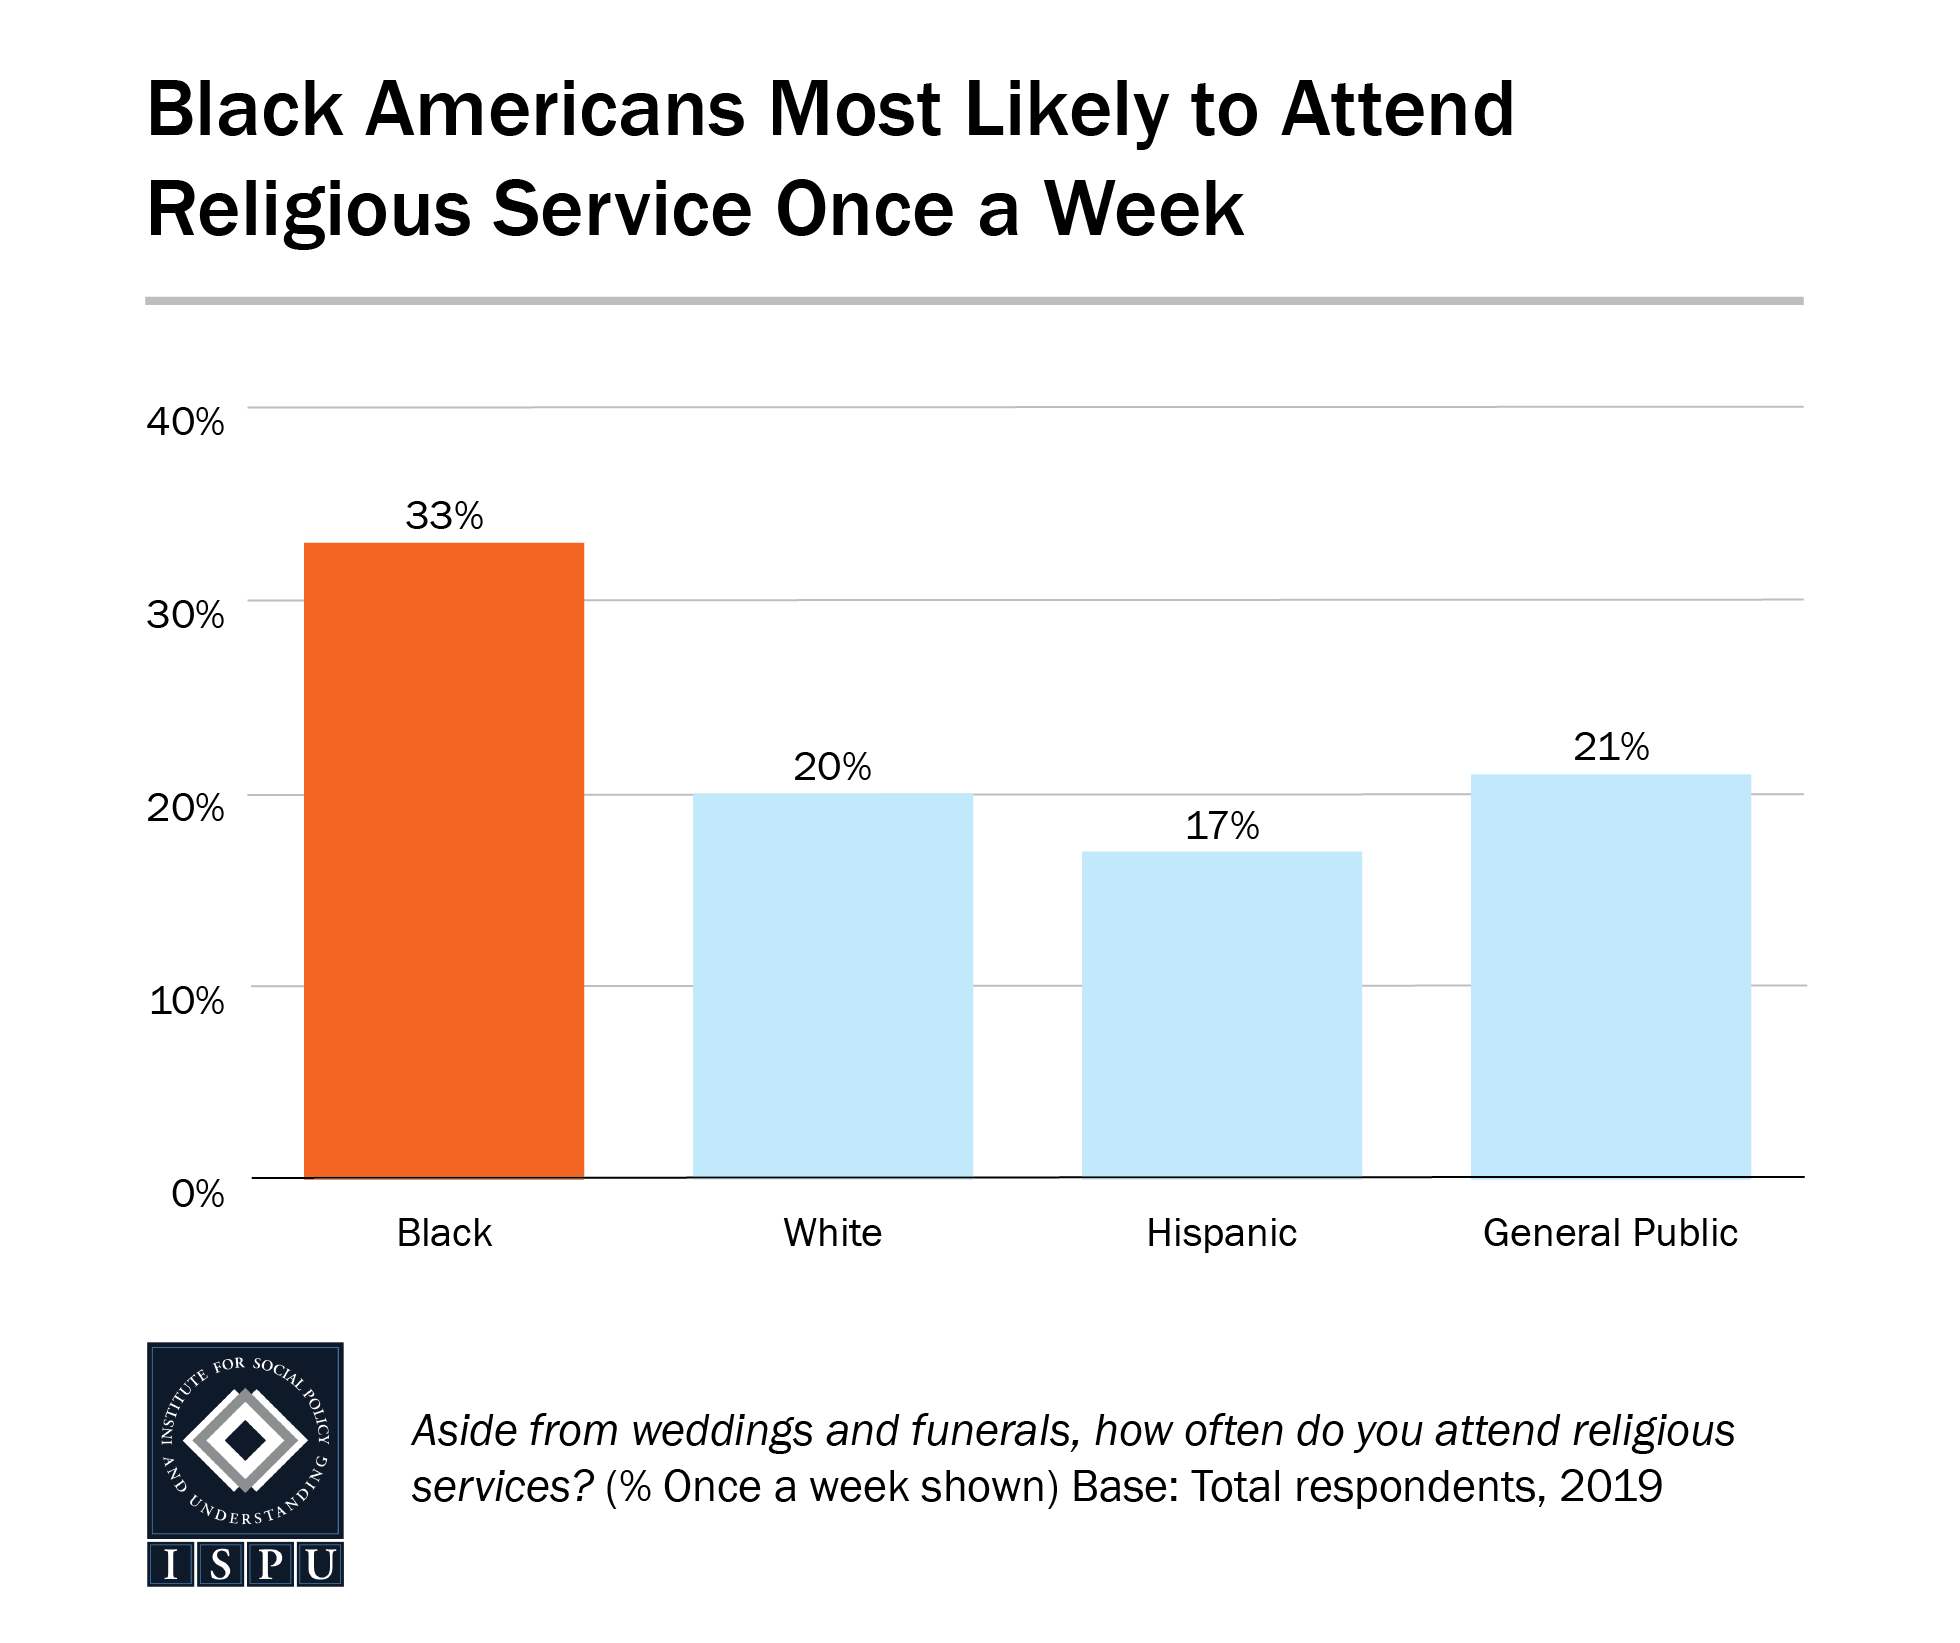 A bar graph showing that Black Americans are the most likely racial/ethnic group in the US to attend religious service once a week